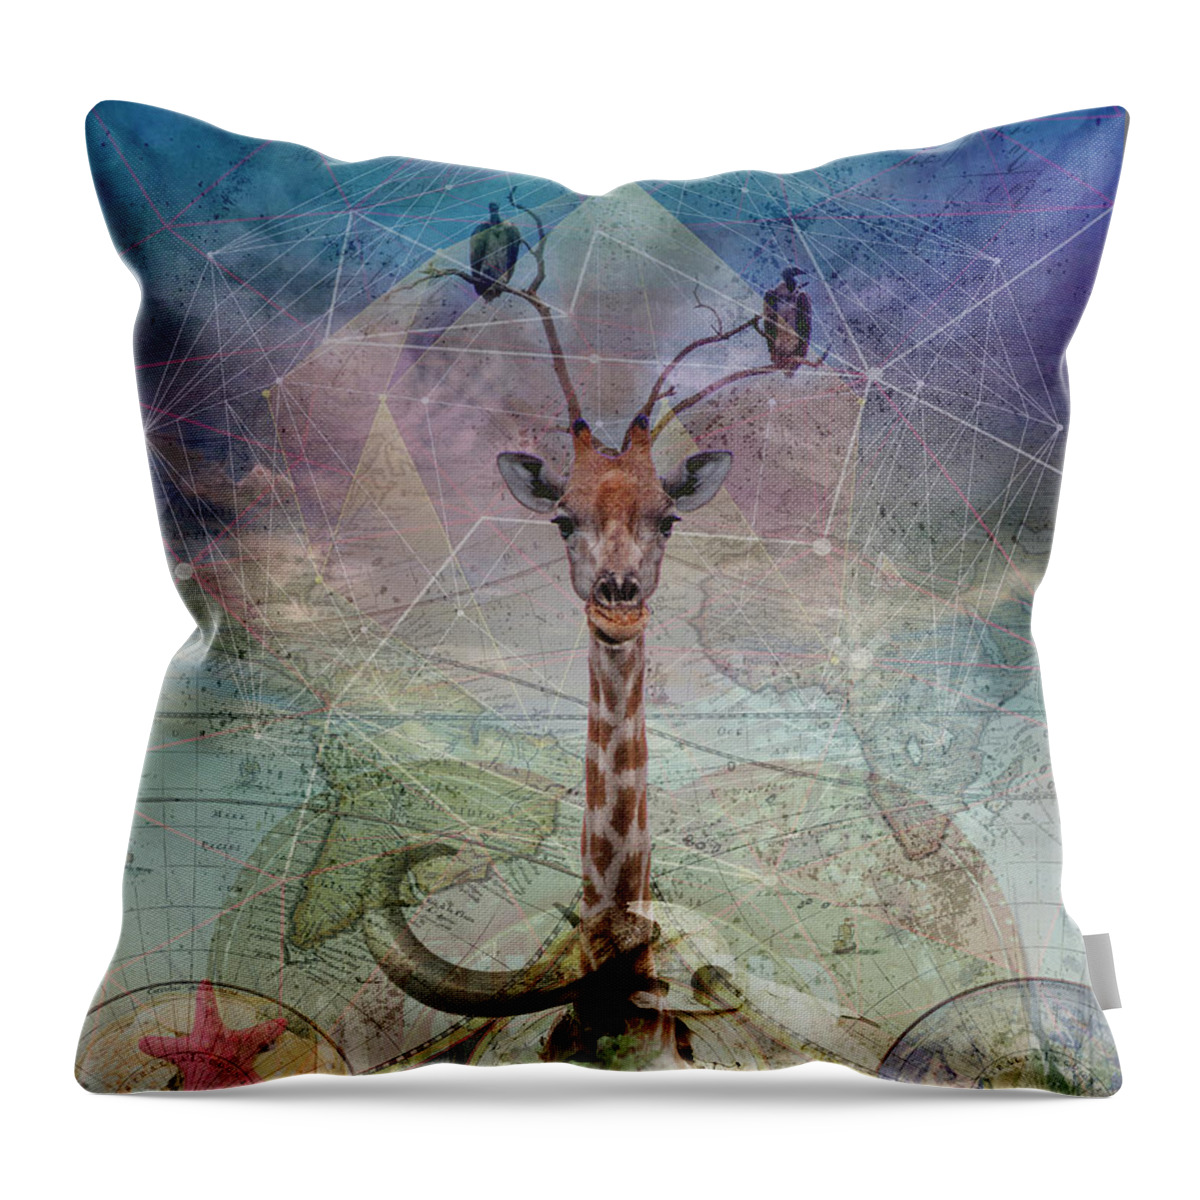 Warning Throw Pillow featuring the digital art Warning by Linda Carruth